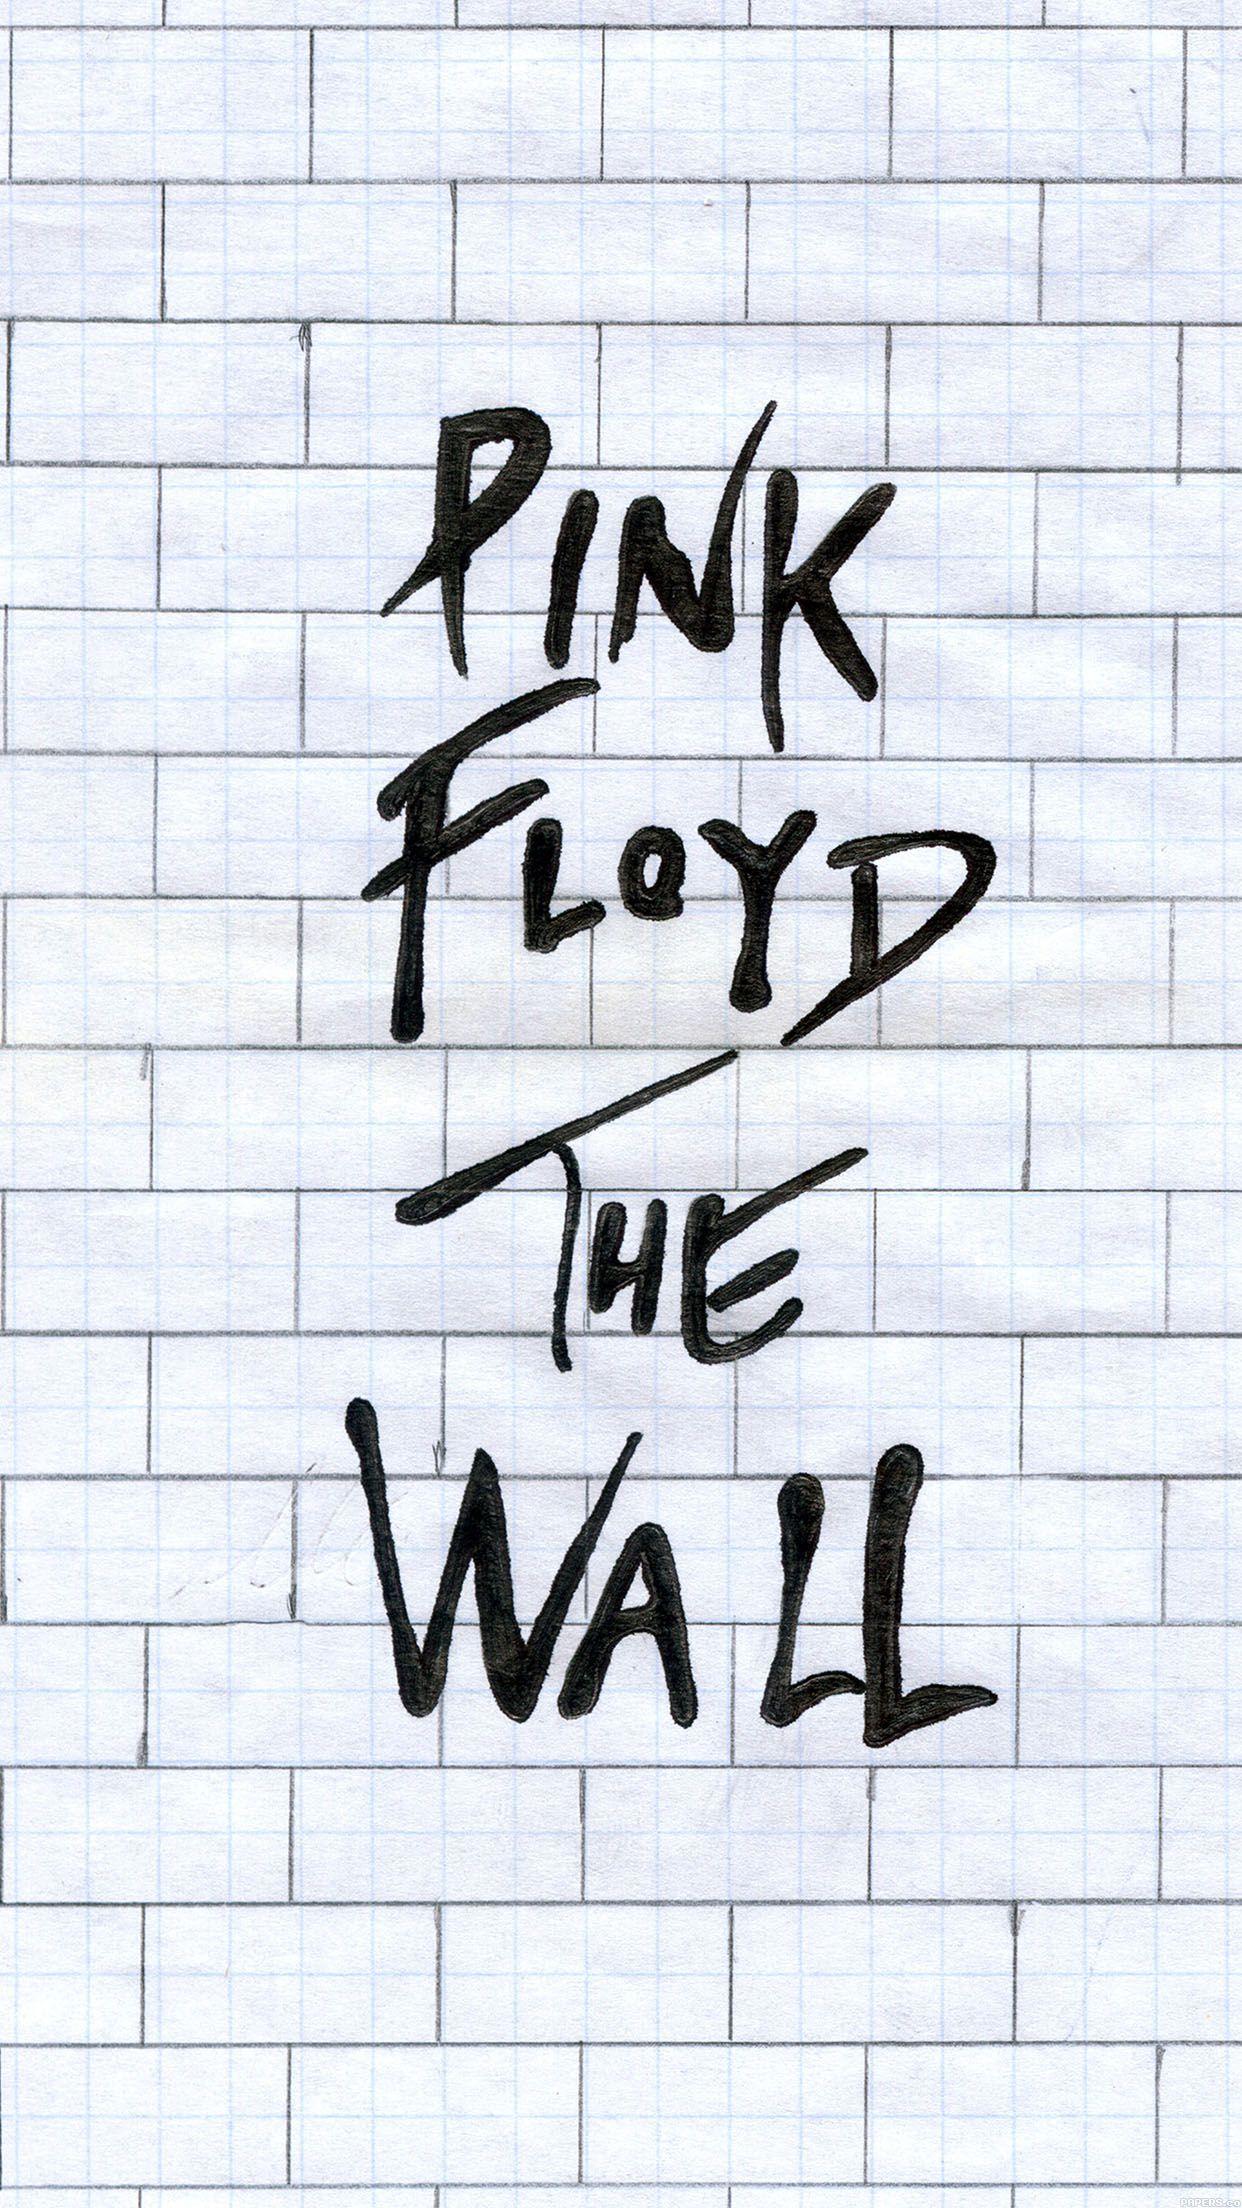 iPhone 6 Wallpaper pink floyd the wall album